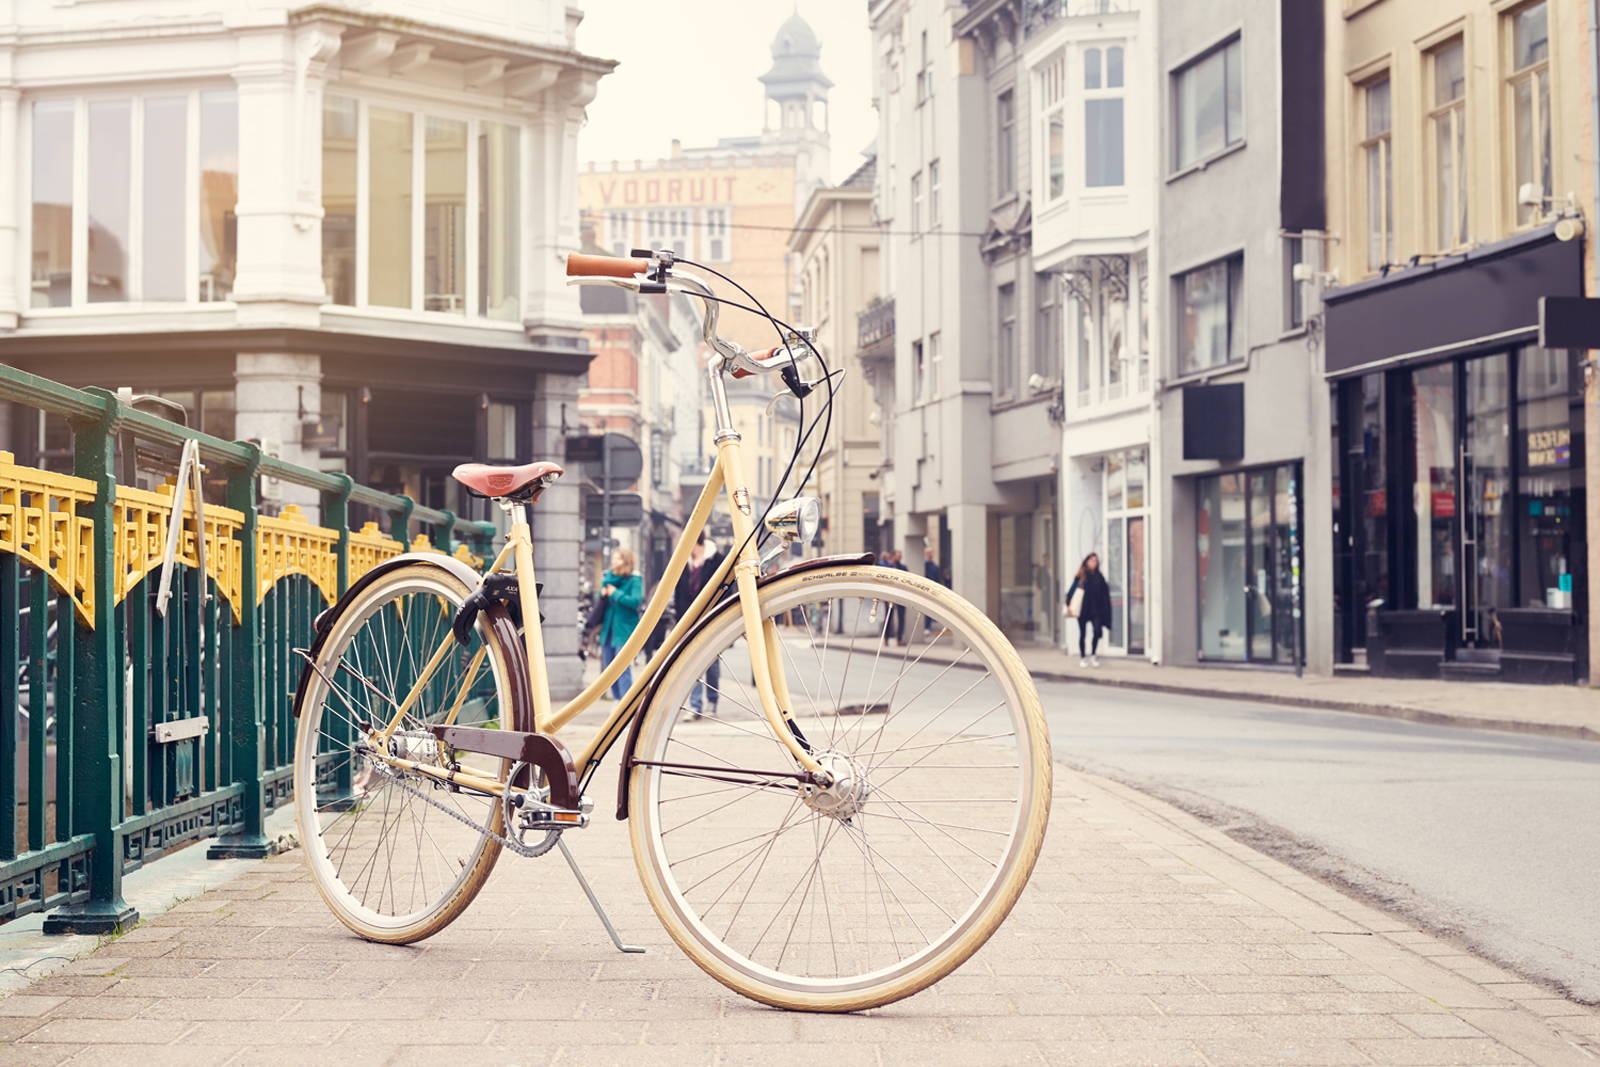 A cream Achielle Babette with brown fenders sits on a city street in Europe.